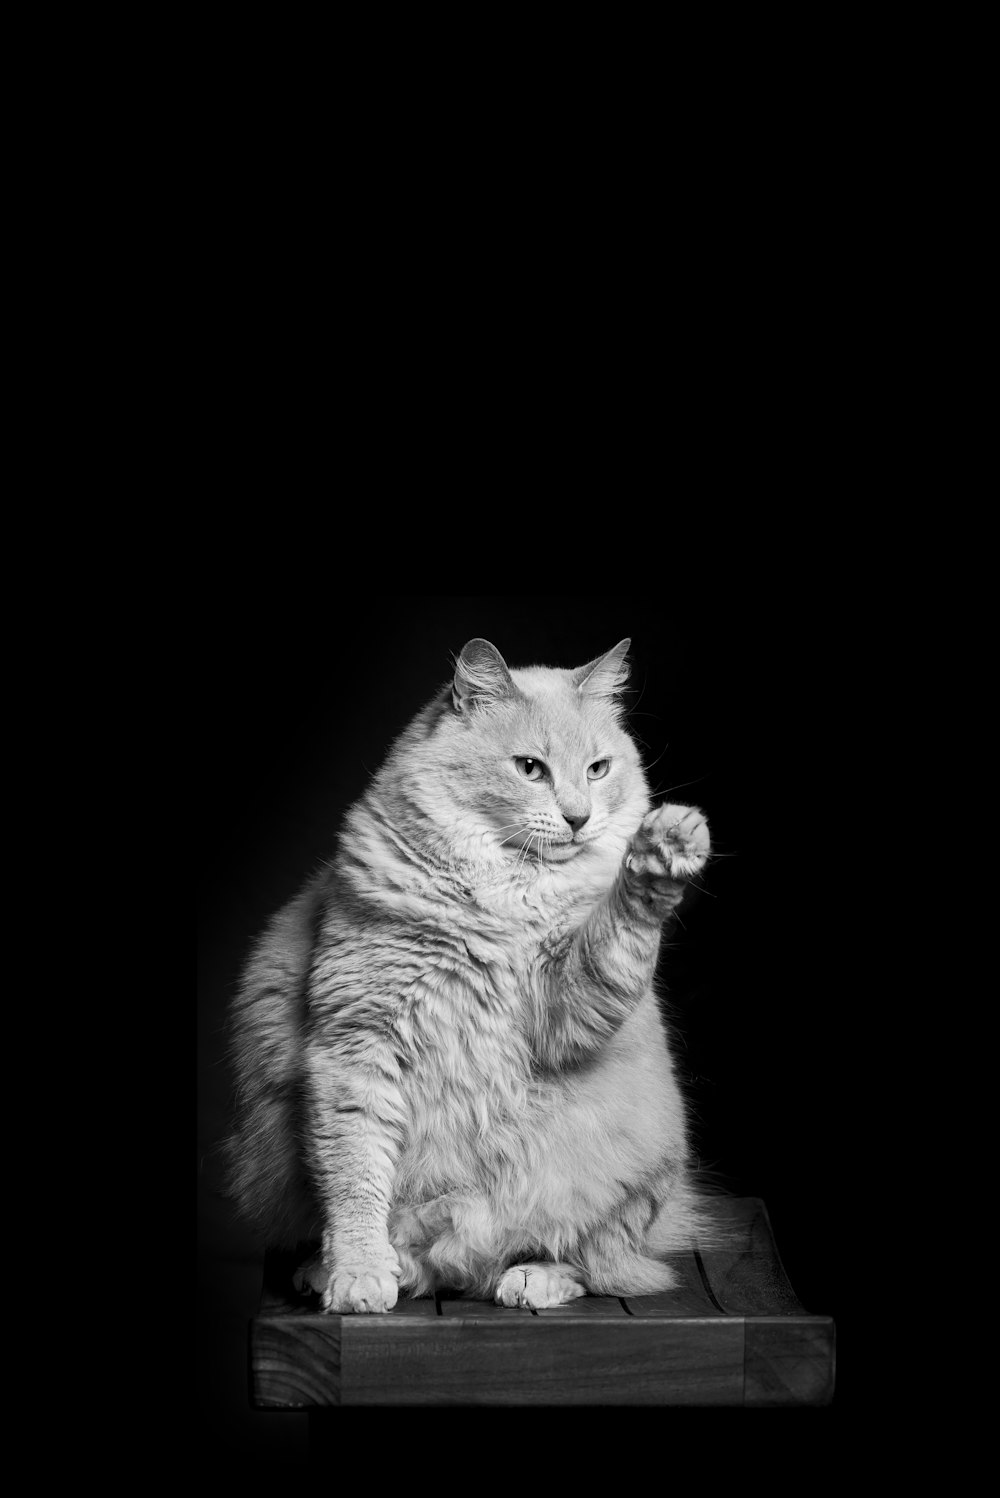 grayscale photo of cat on black background